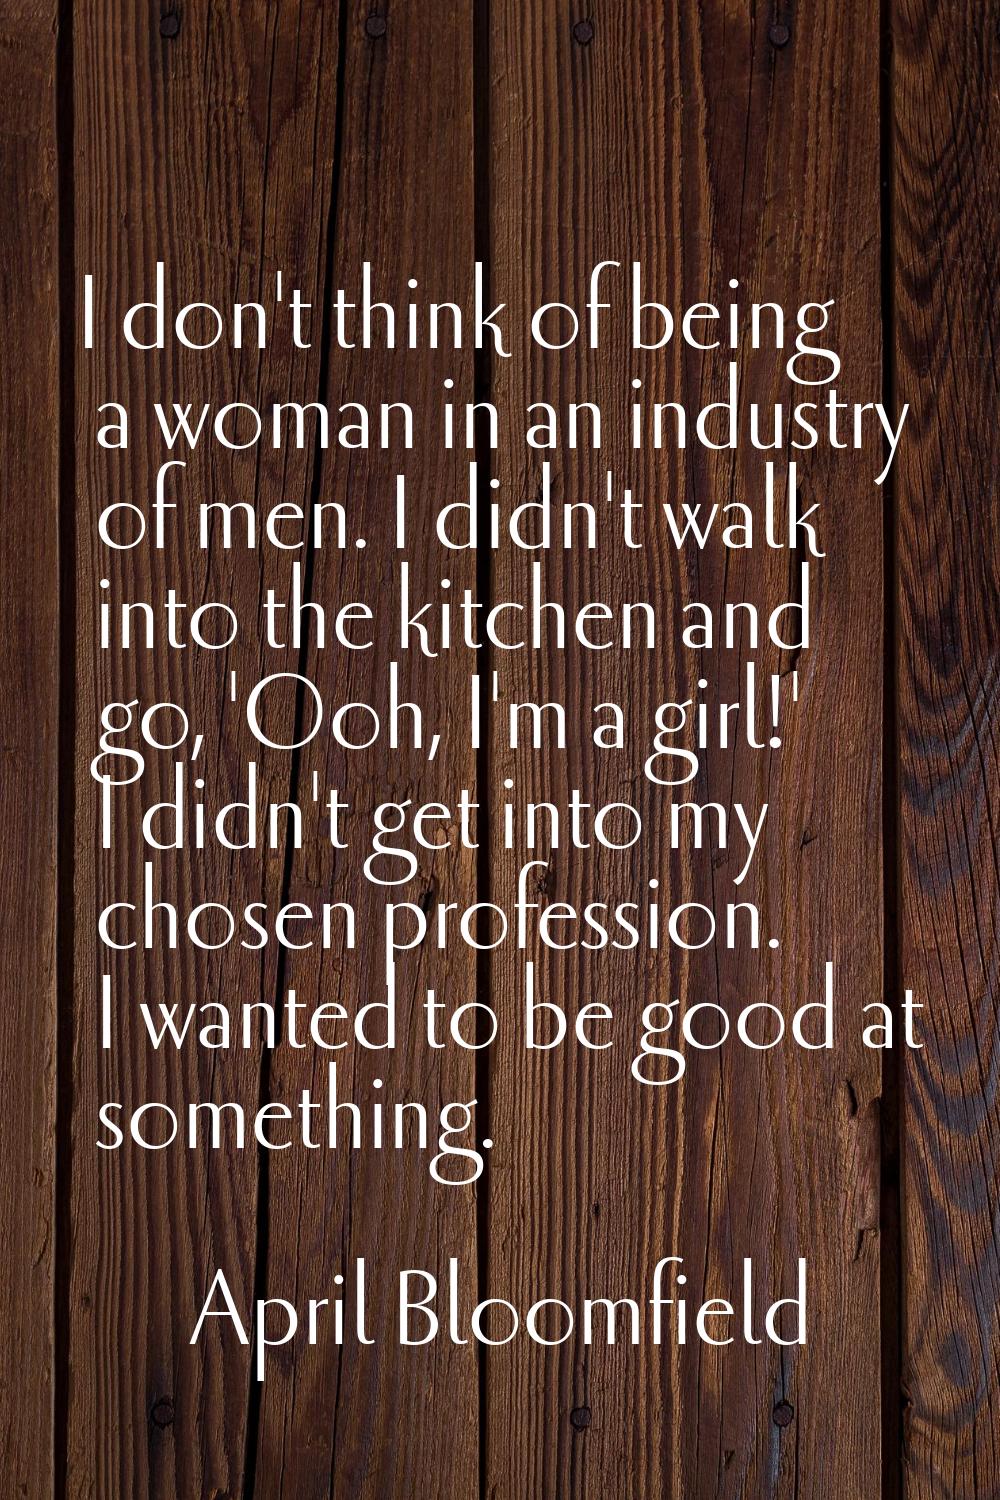 I don't think of being a woman in an industry of men. I didn't walk into the kitchen and go, 'Ooh, 